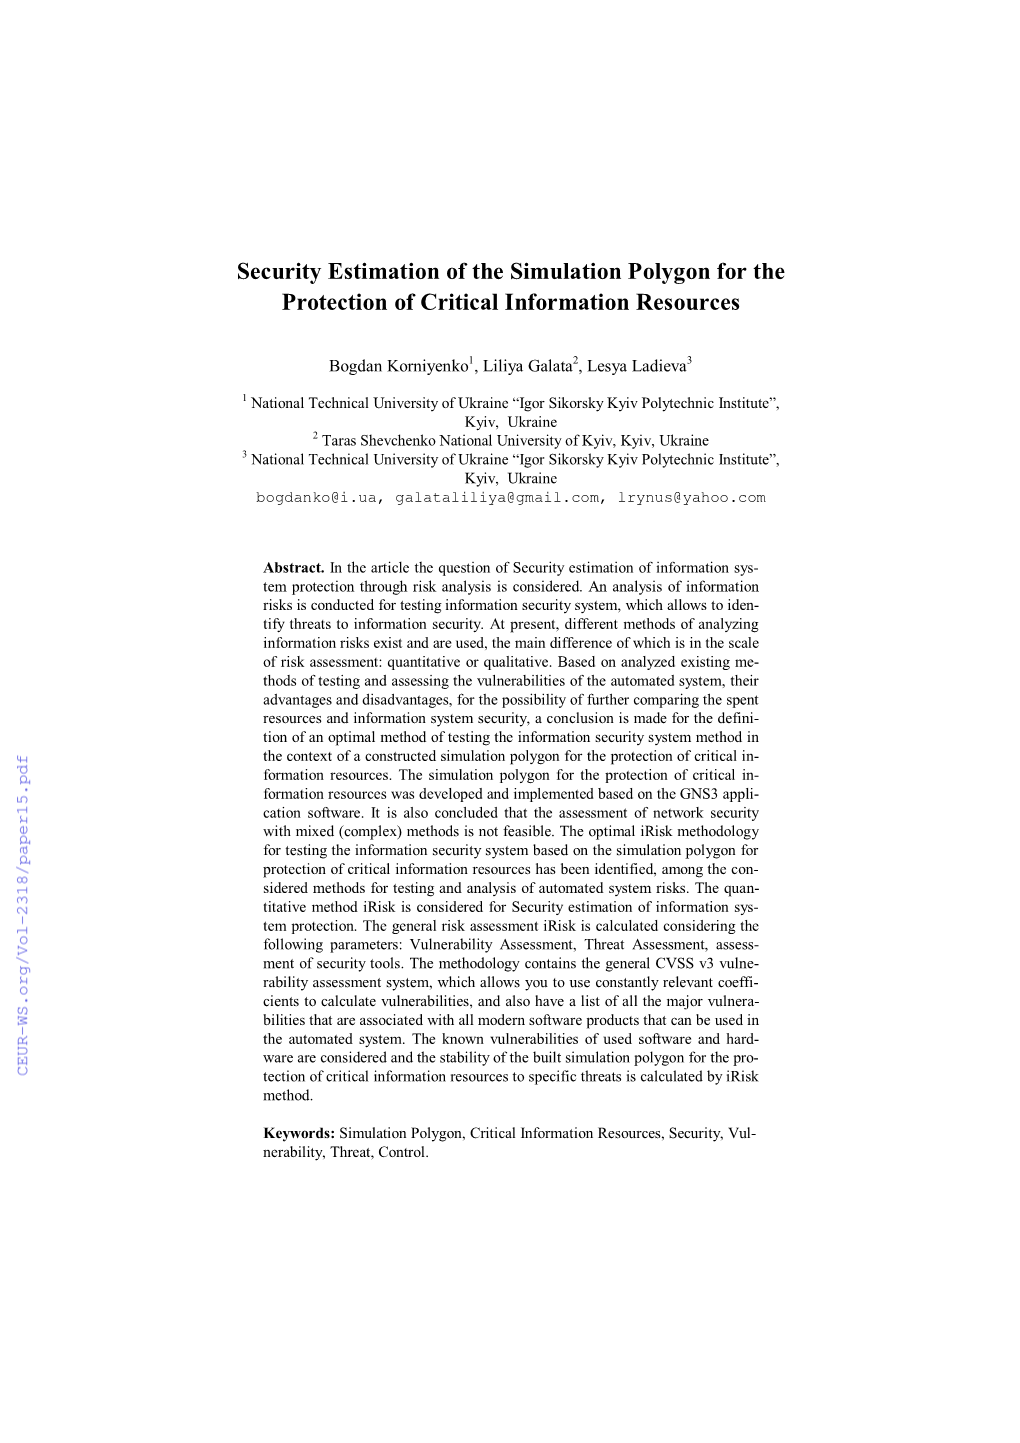 Security Estimation of the Simulation Polygon for the Protection of Critical Information Resources